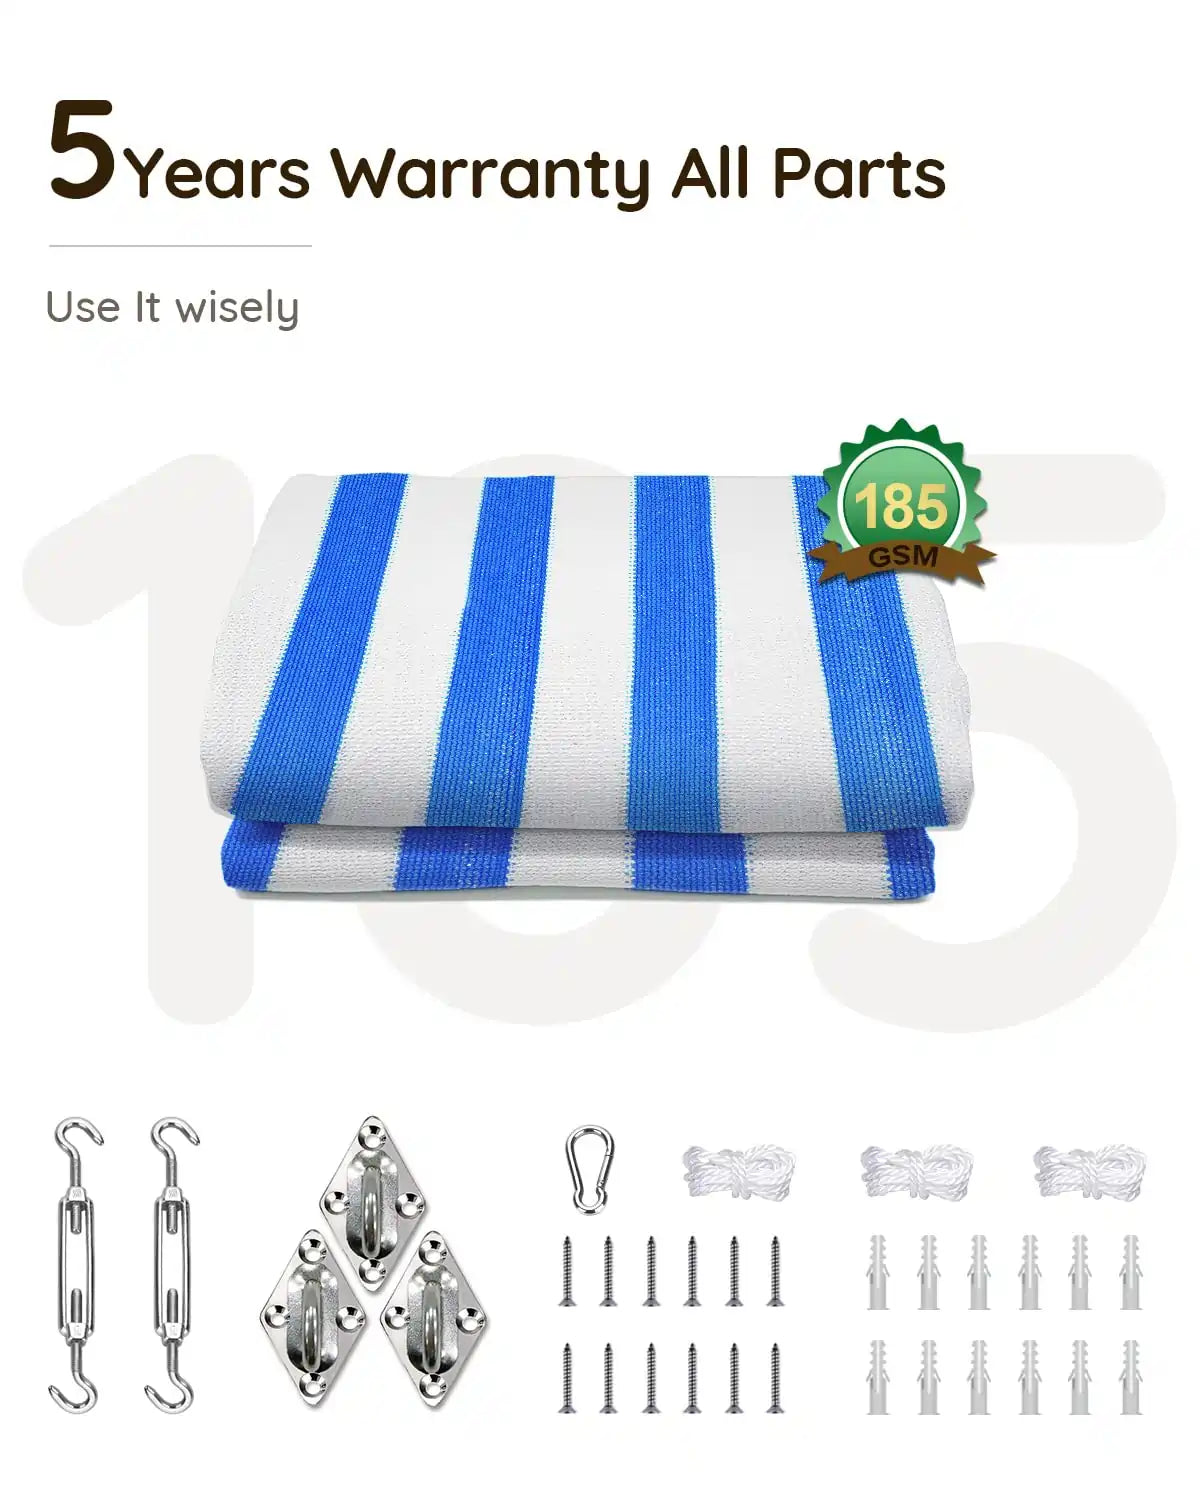 White and Blue shade sail has 5 years warranty